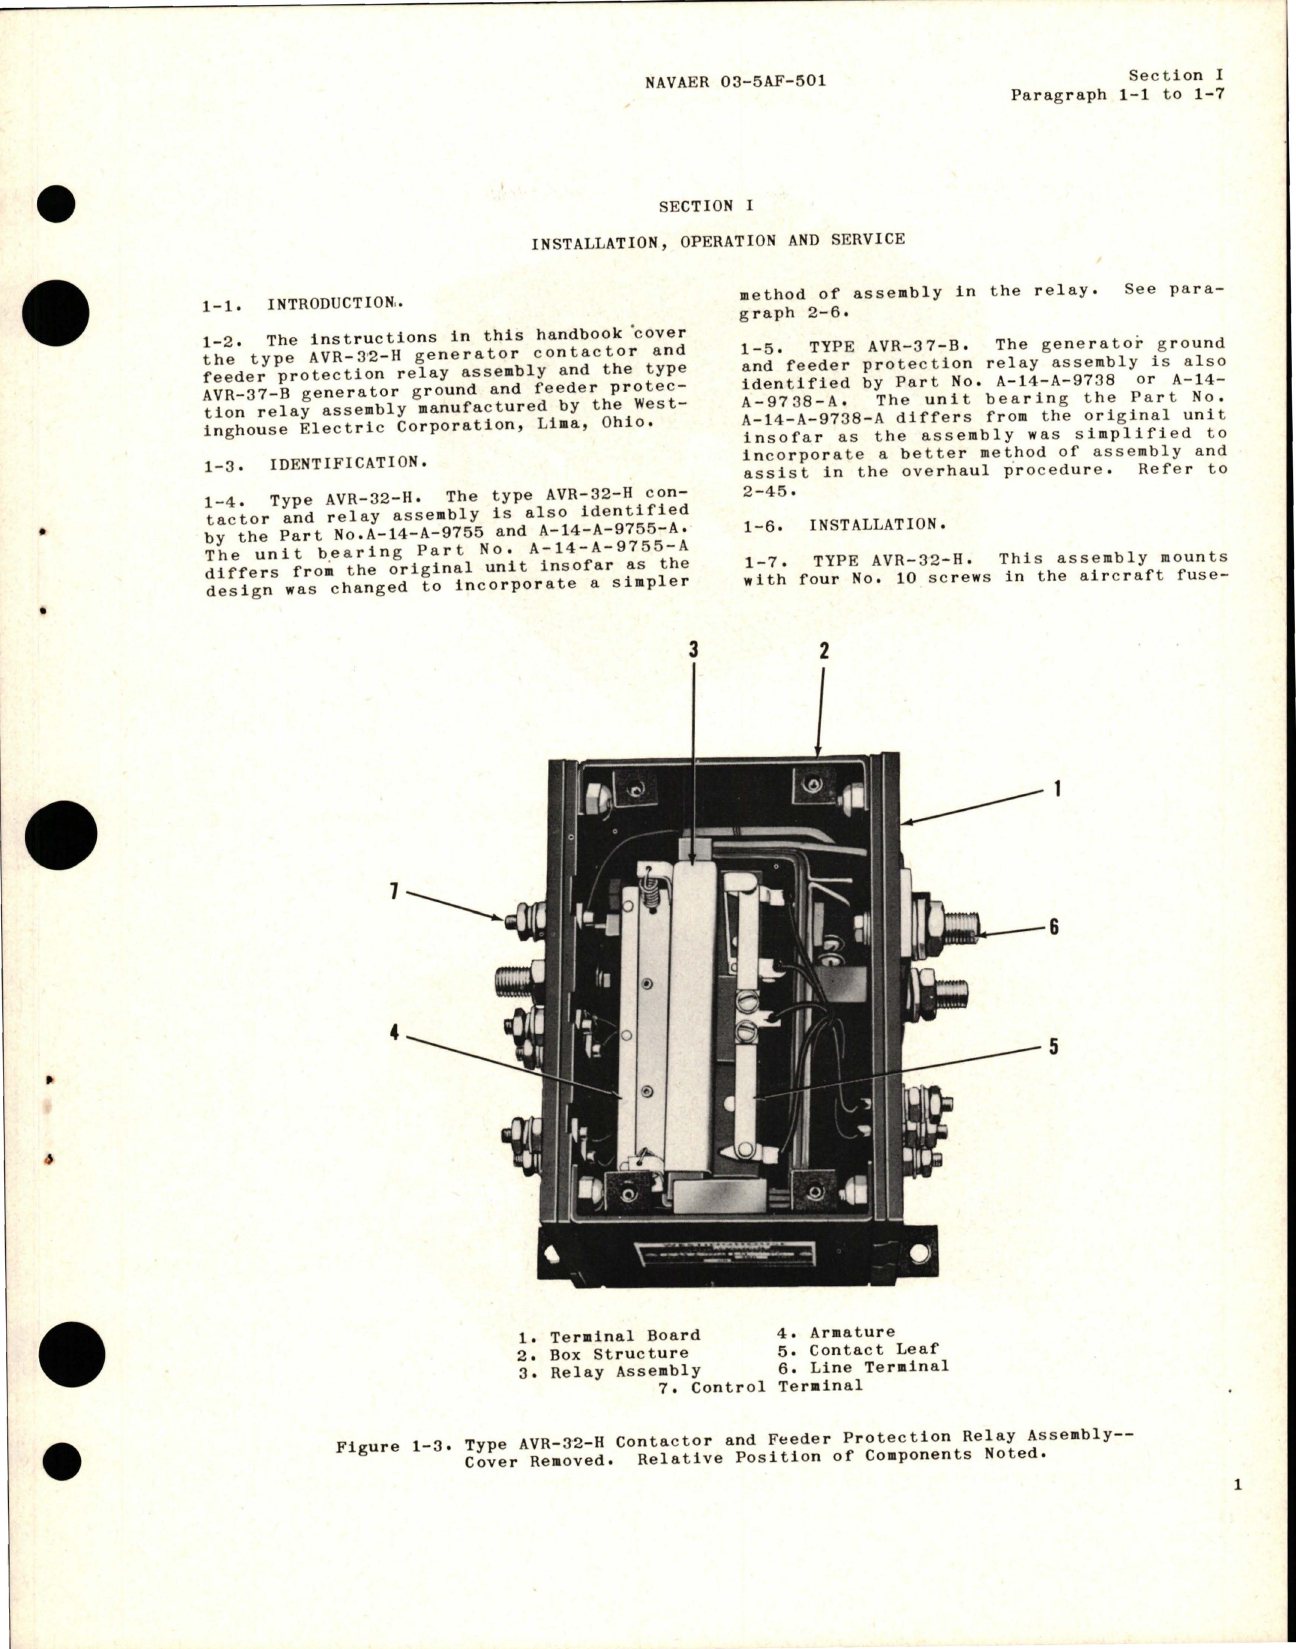 Sample page 5 from AirCorps Library document: Operation, Service and Overhaul Instructions with Parts Catalog for Generator Contractor and Feeder Protection Relay Assembly